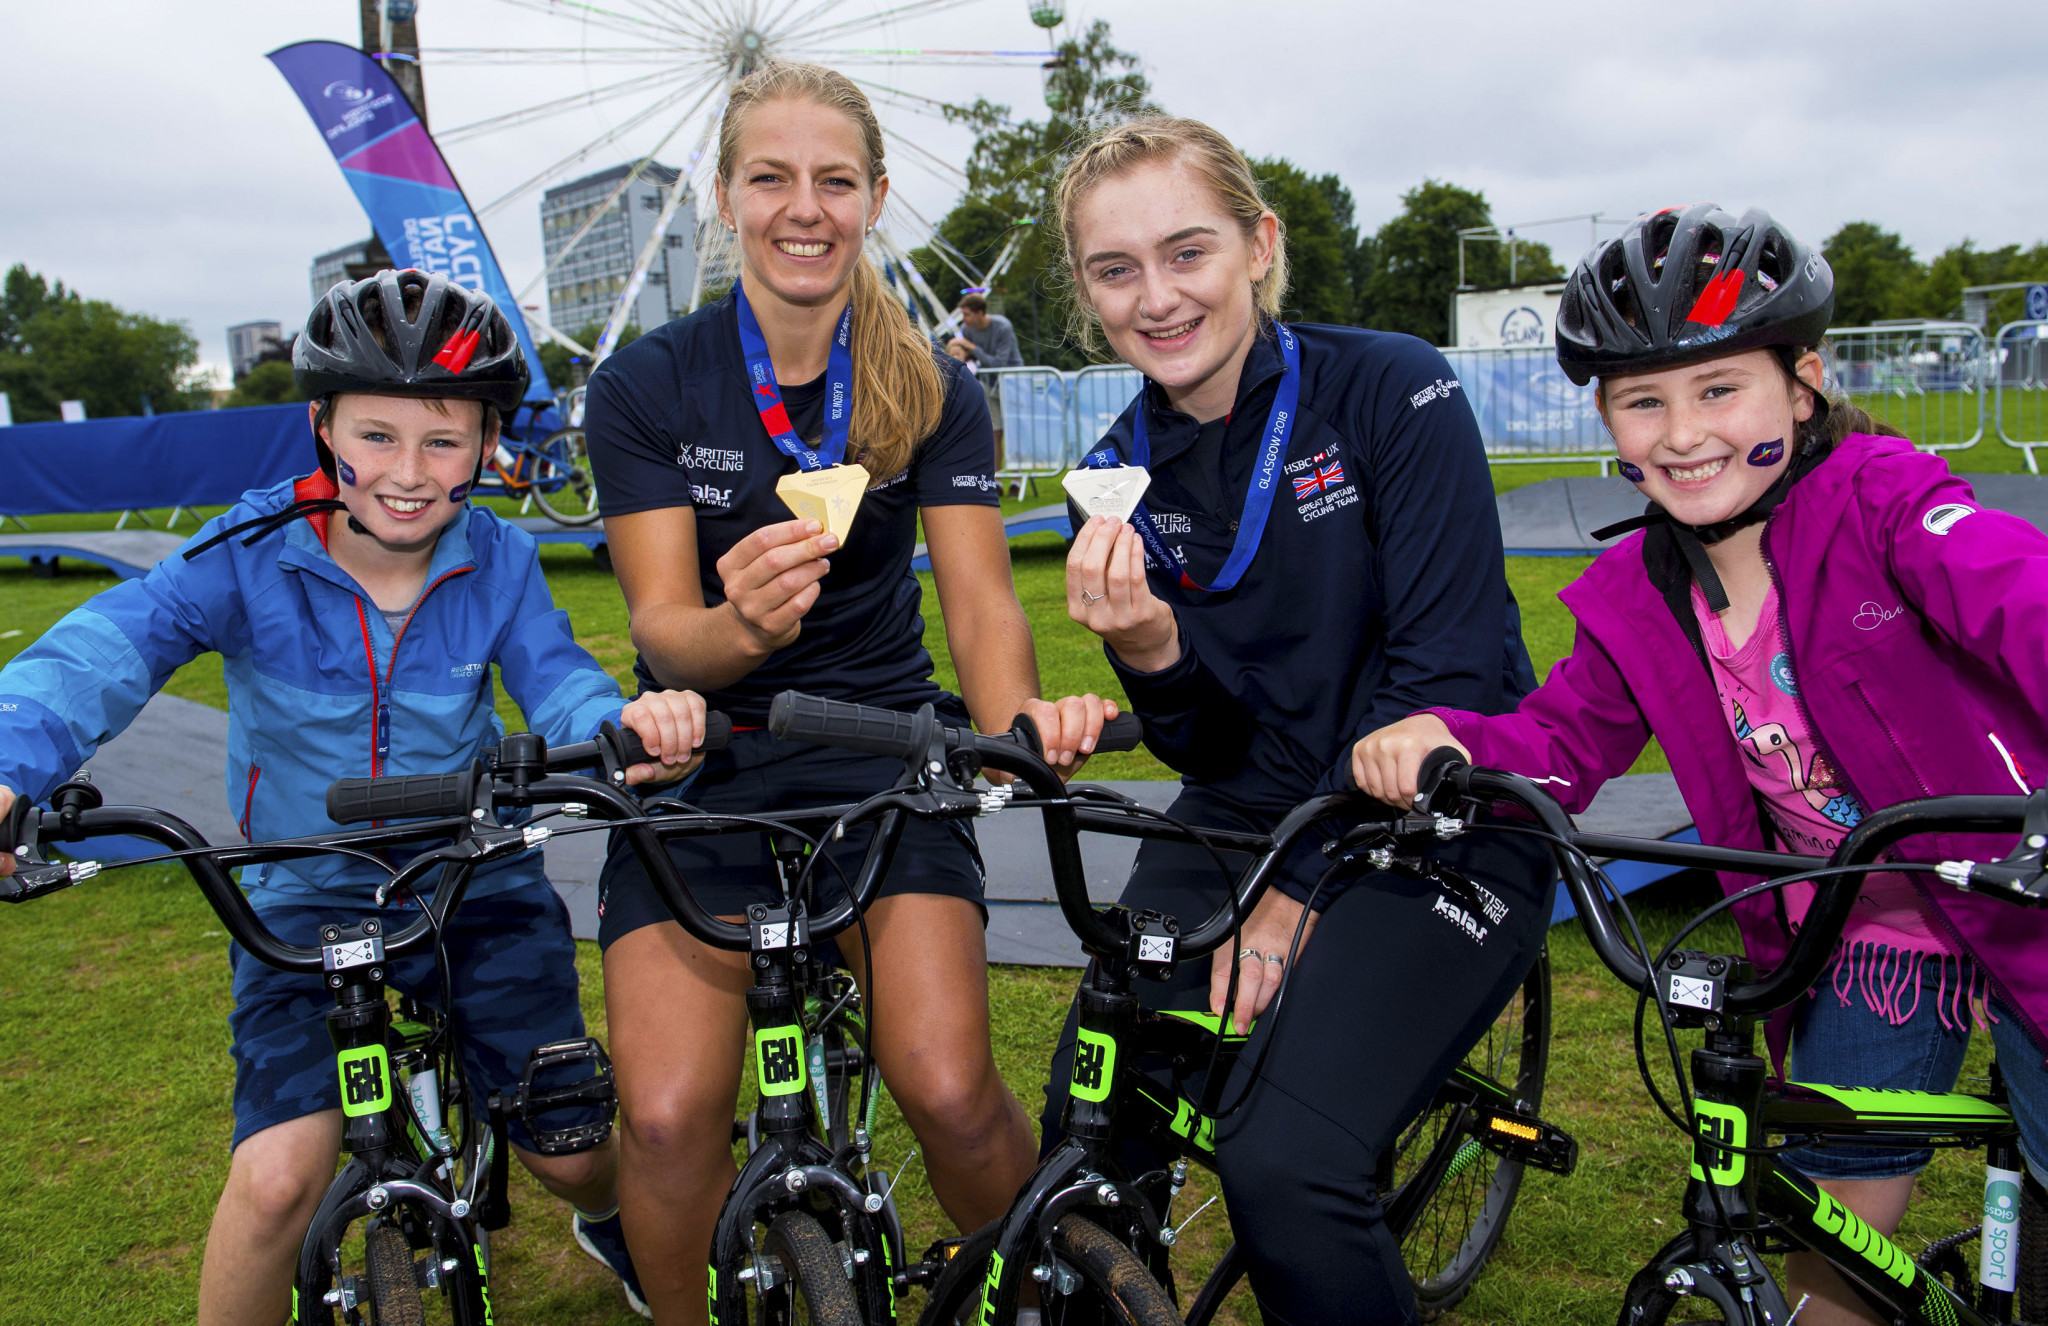 Team pursuit champion Neah Evans and scratch race silver medallist Emily Kay also visited the Green ©Glasgow 2018